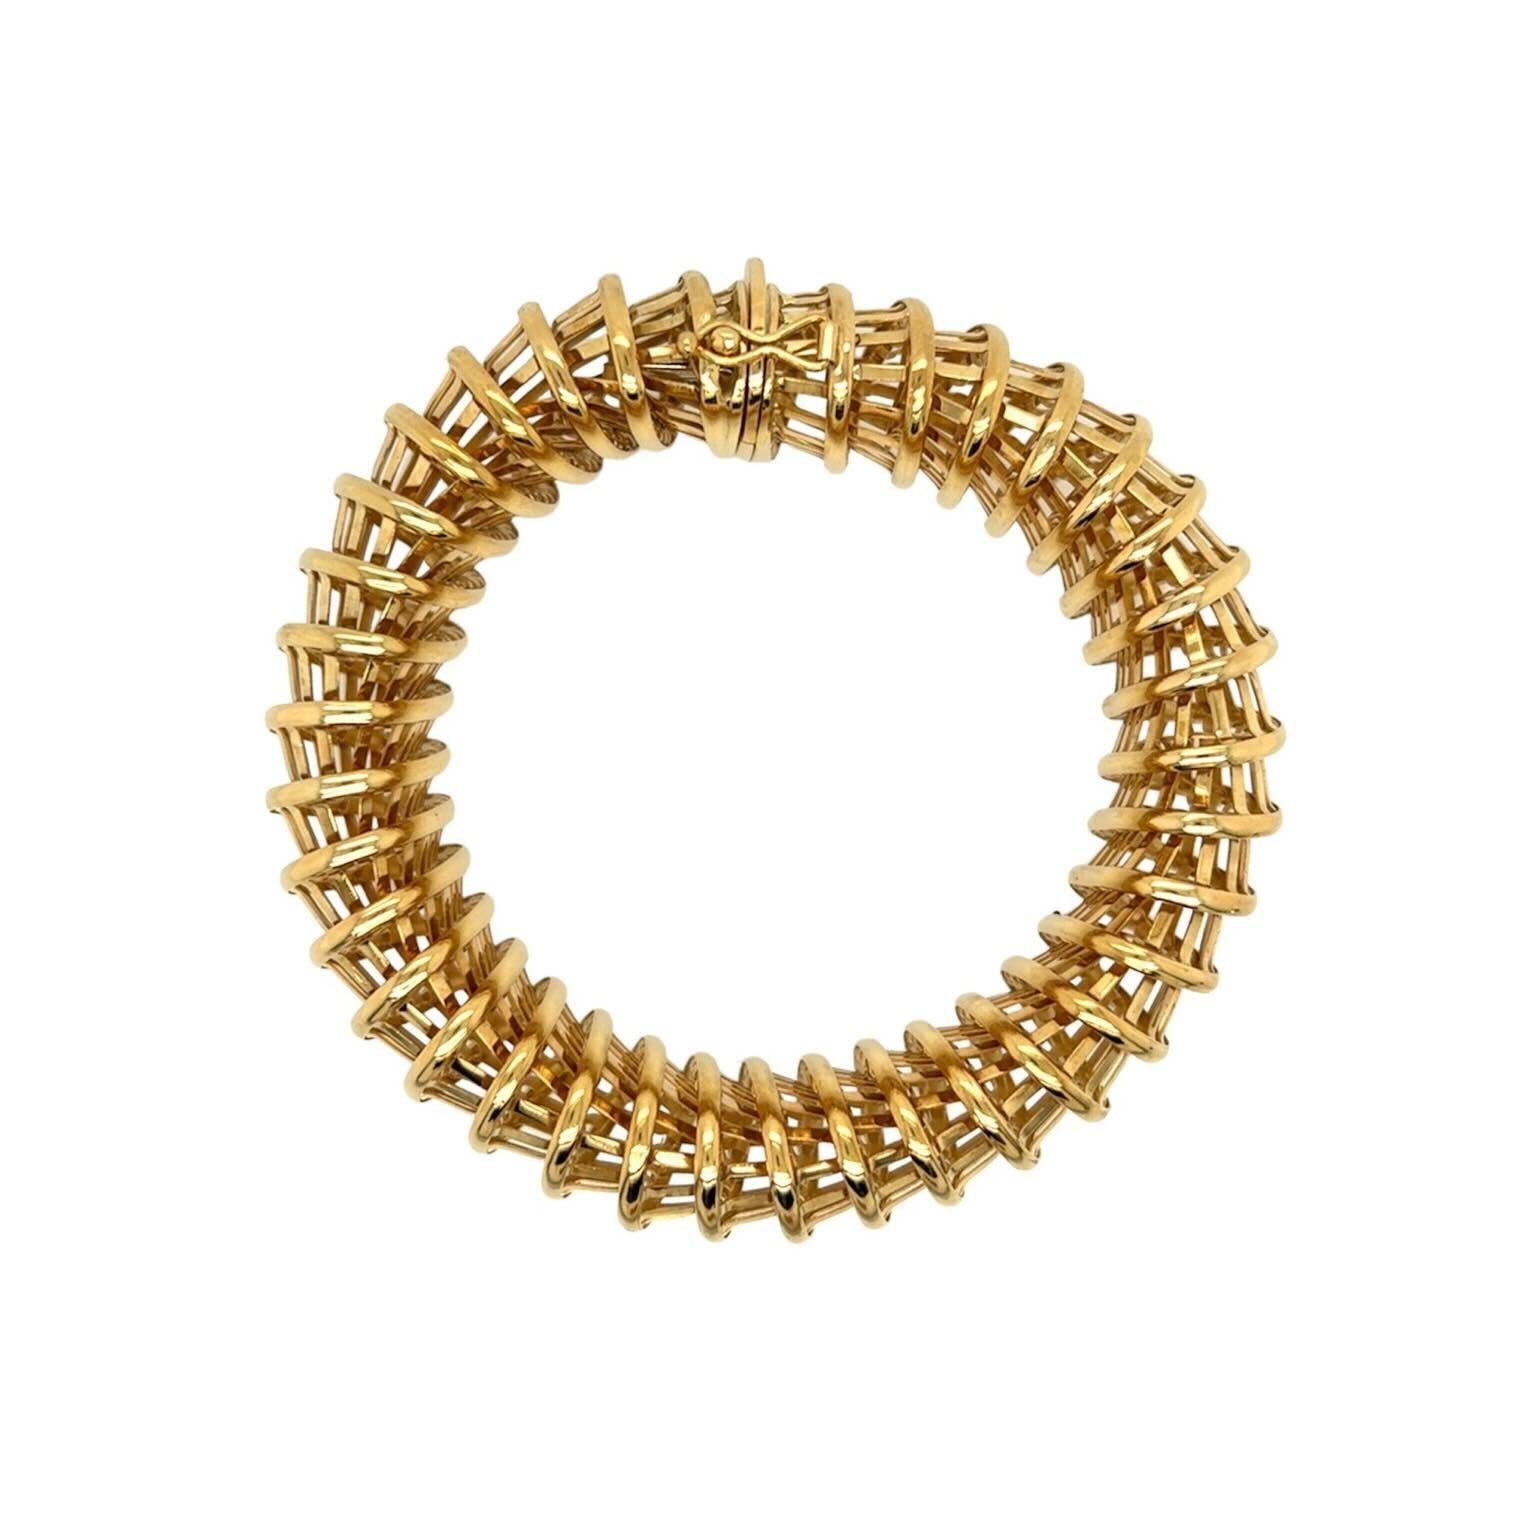 An 18 karat yellow gold bracelet, Italy.  Formed of interlocking perforated oval truncated cones forming an oval tubular bracelet.  Length approximately 7 3/4 inches.  Gross weight approximately 54.20 grams.